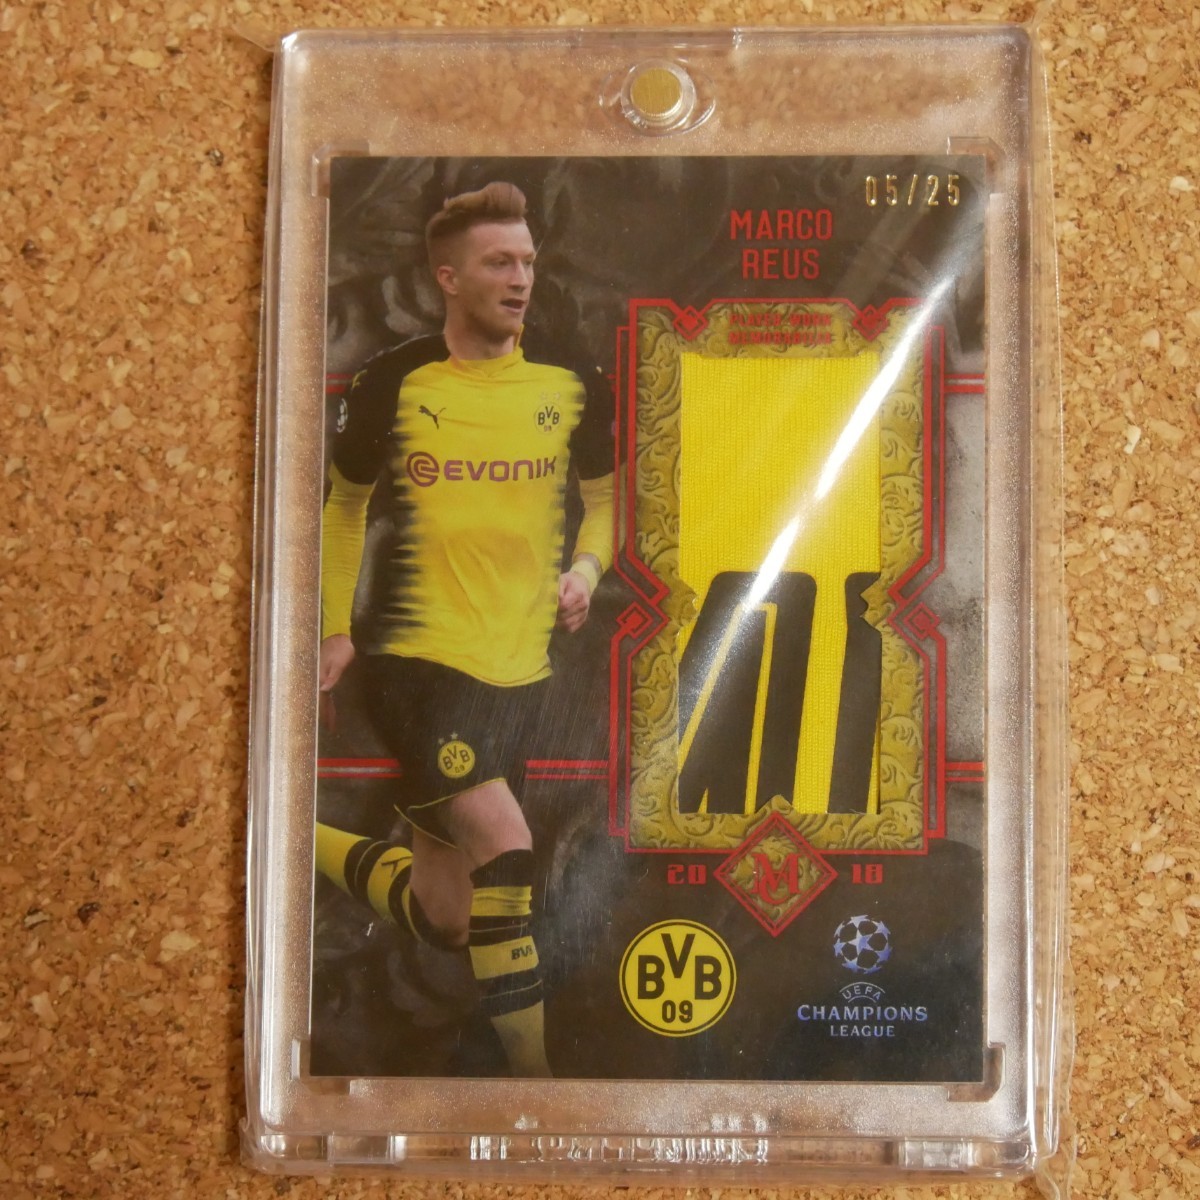 topps museum collection Marco Reus 25シリ トップス マルコ・ロイス ドルトムント ドイツ パッチ patch ジャージ jersey soccer_画像1